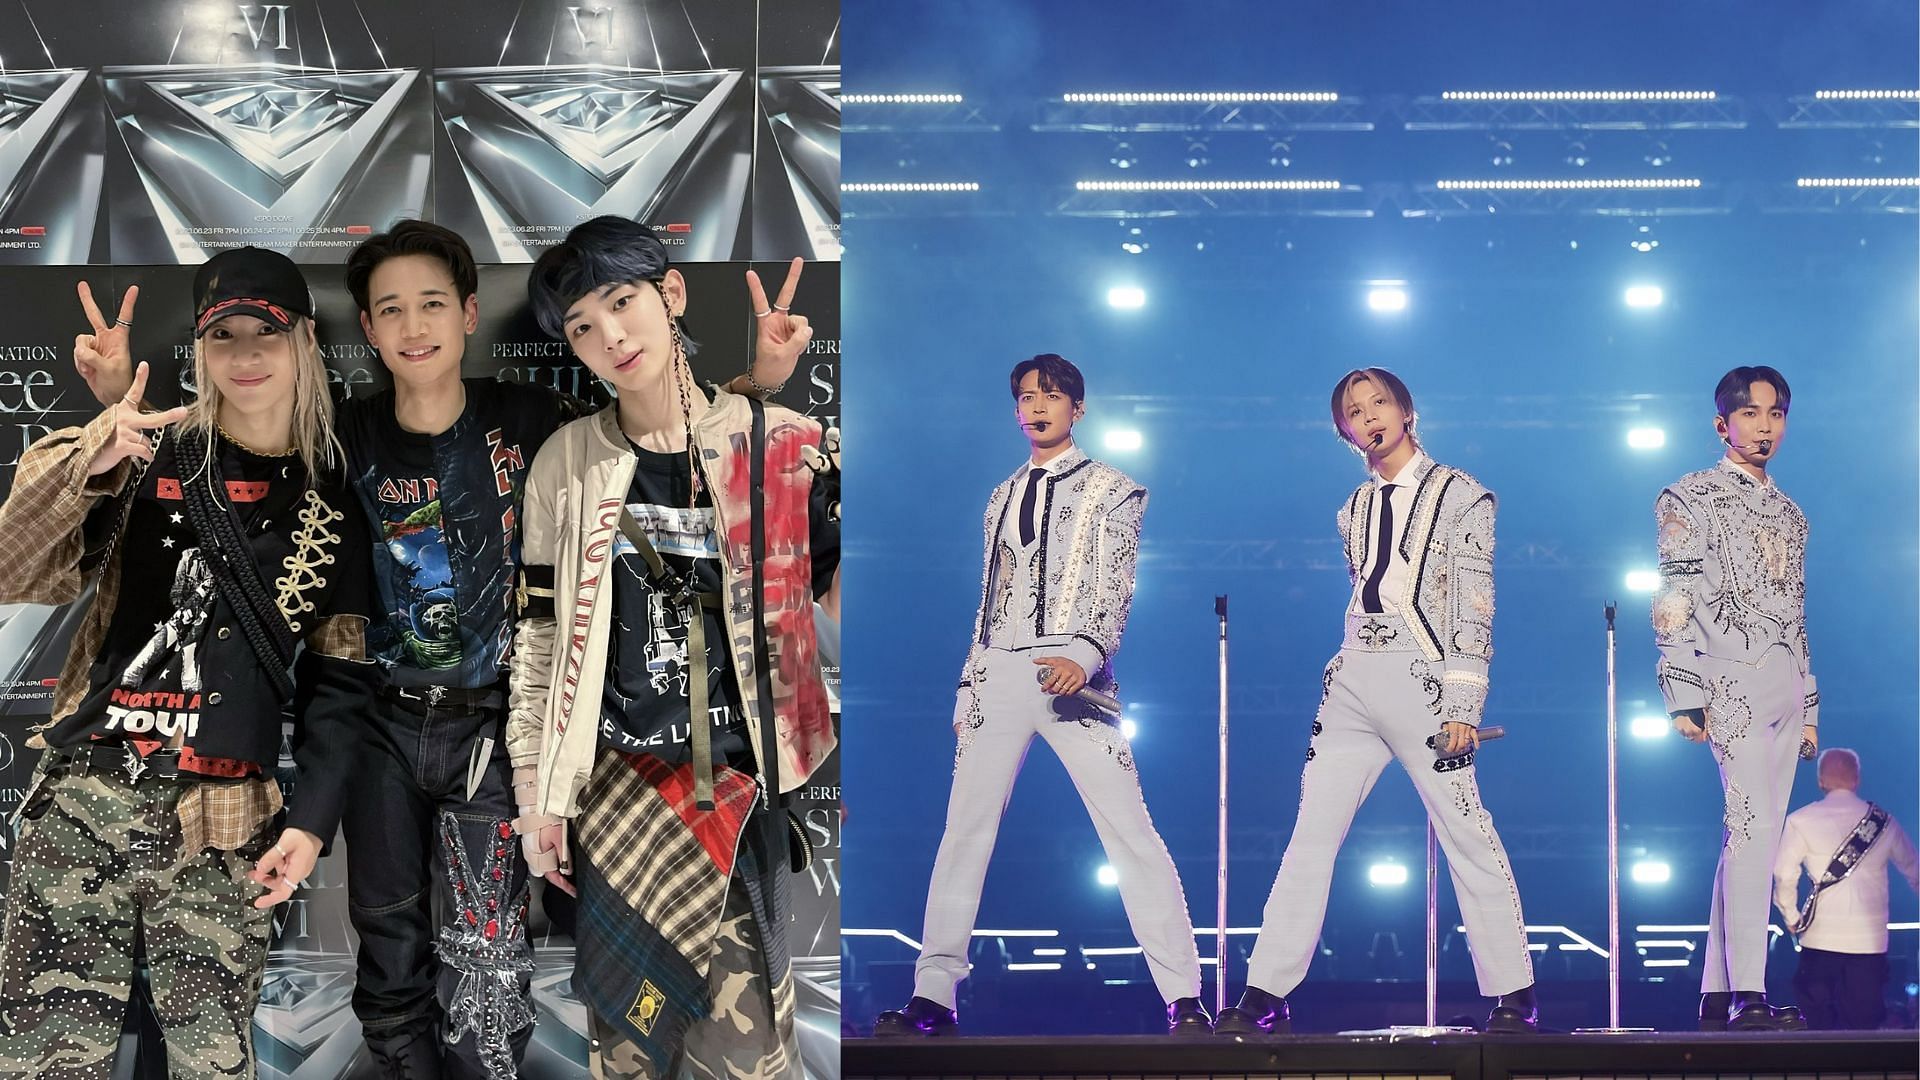 Taemin, Minho and Key in stills and behind-the-scenes from the first concert since 2016 to celebrate the SHINee 15th Anniversary.